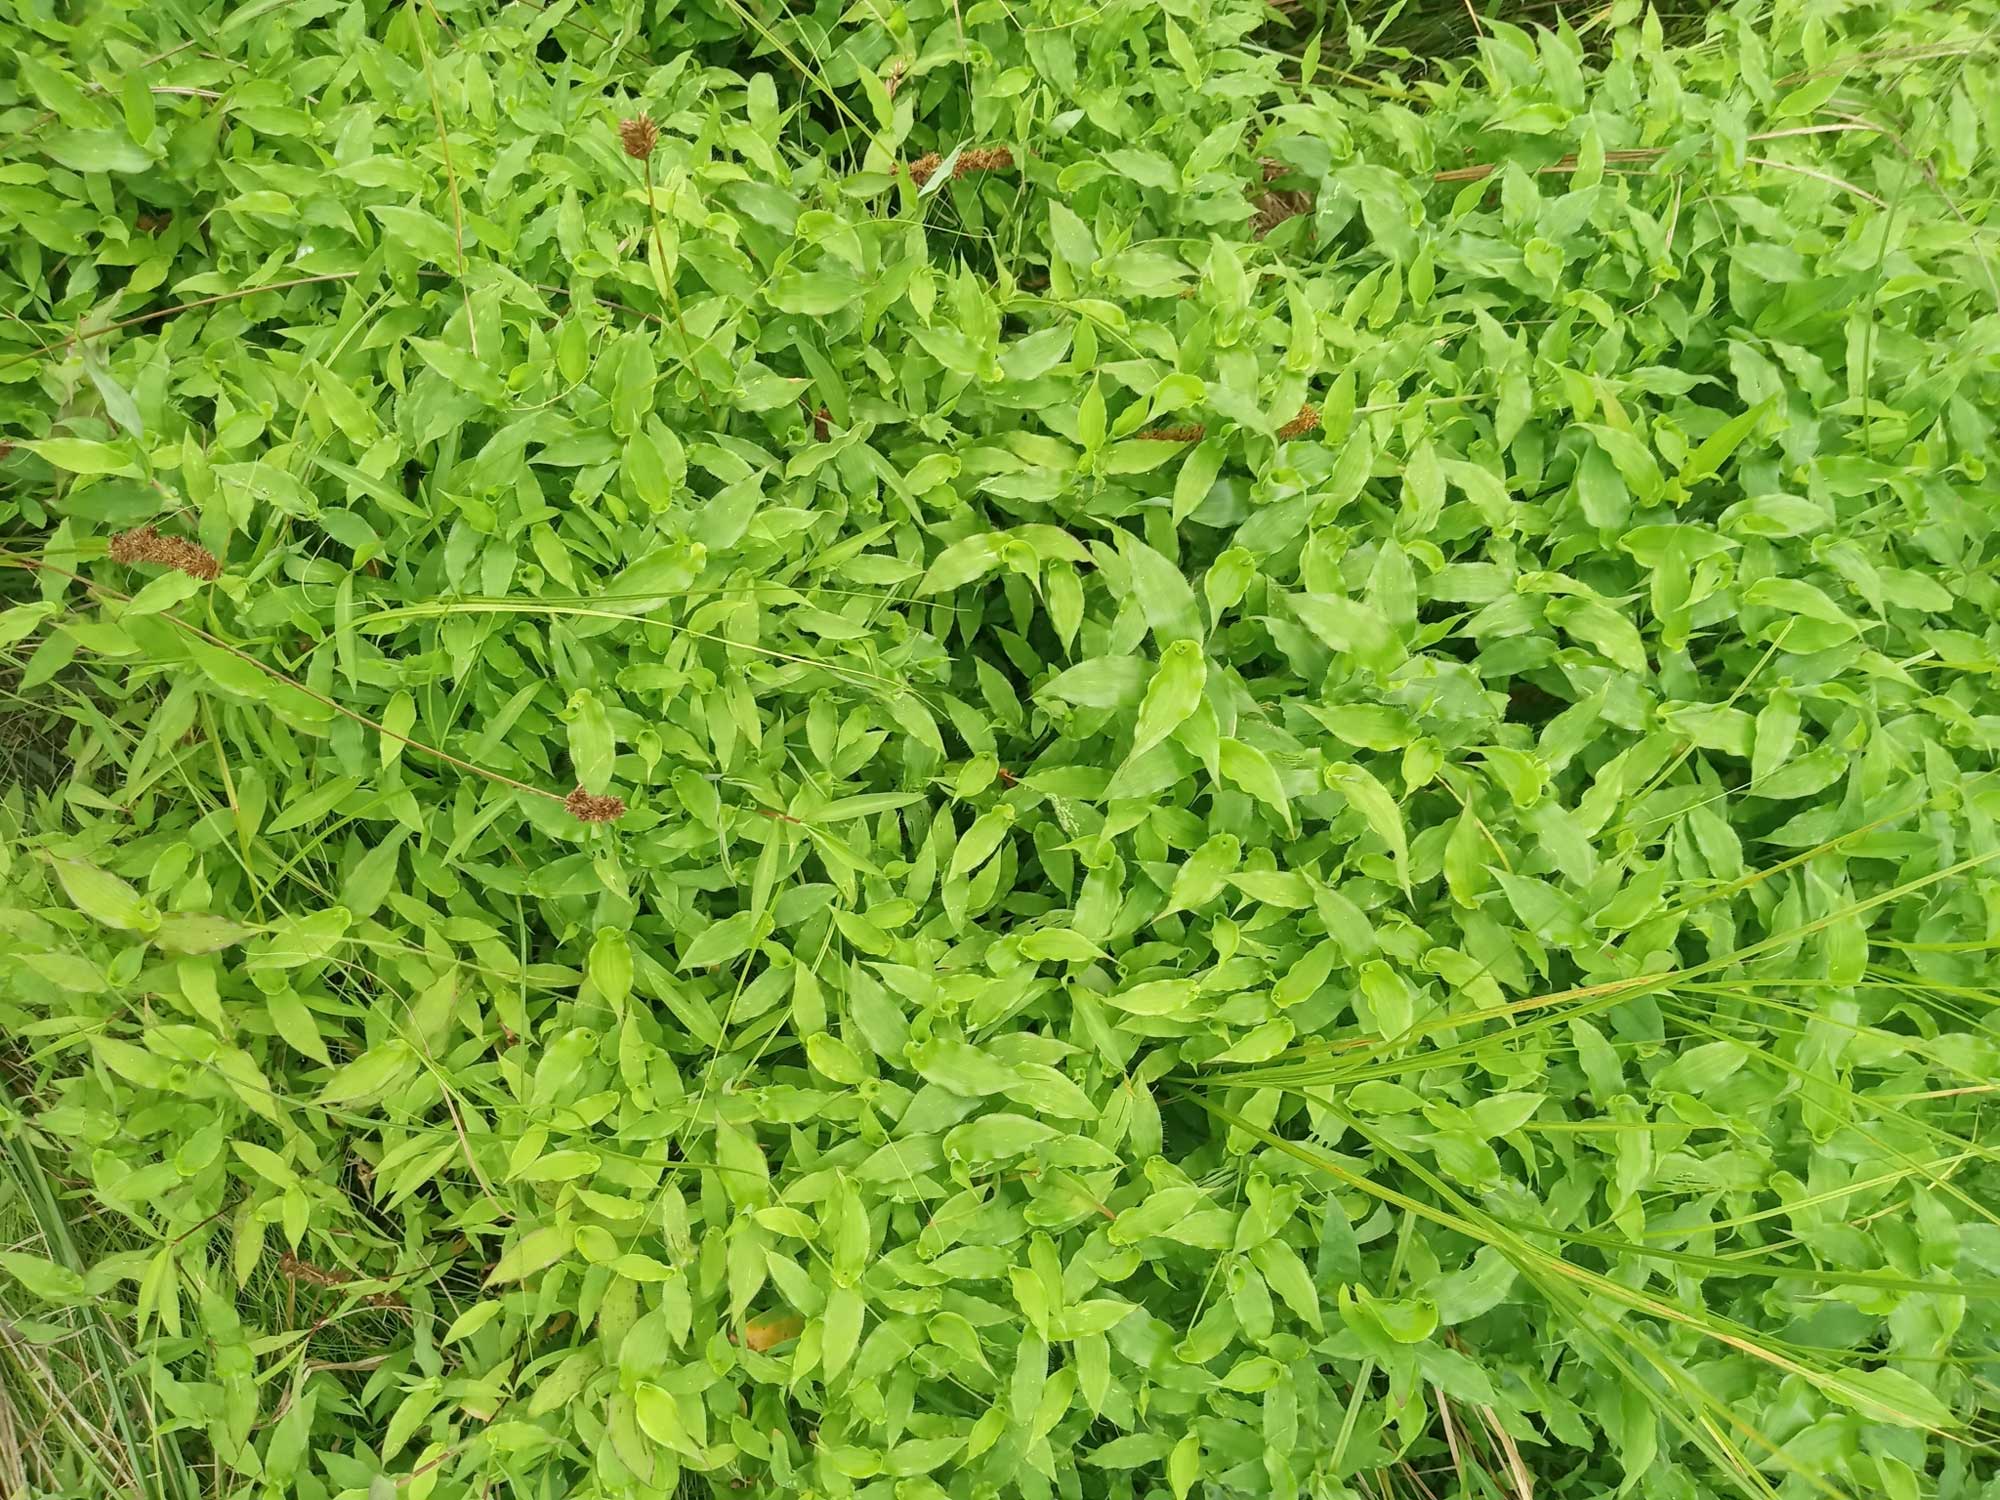 Photograph of small carpetgrass. Teh photo shows the ground covered with low-growing plants that have ovate leaves with wavy margins.